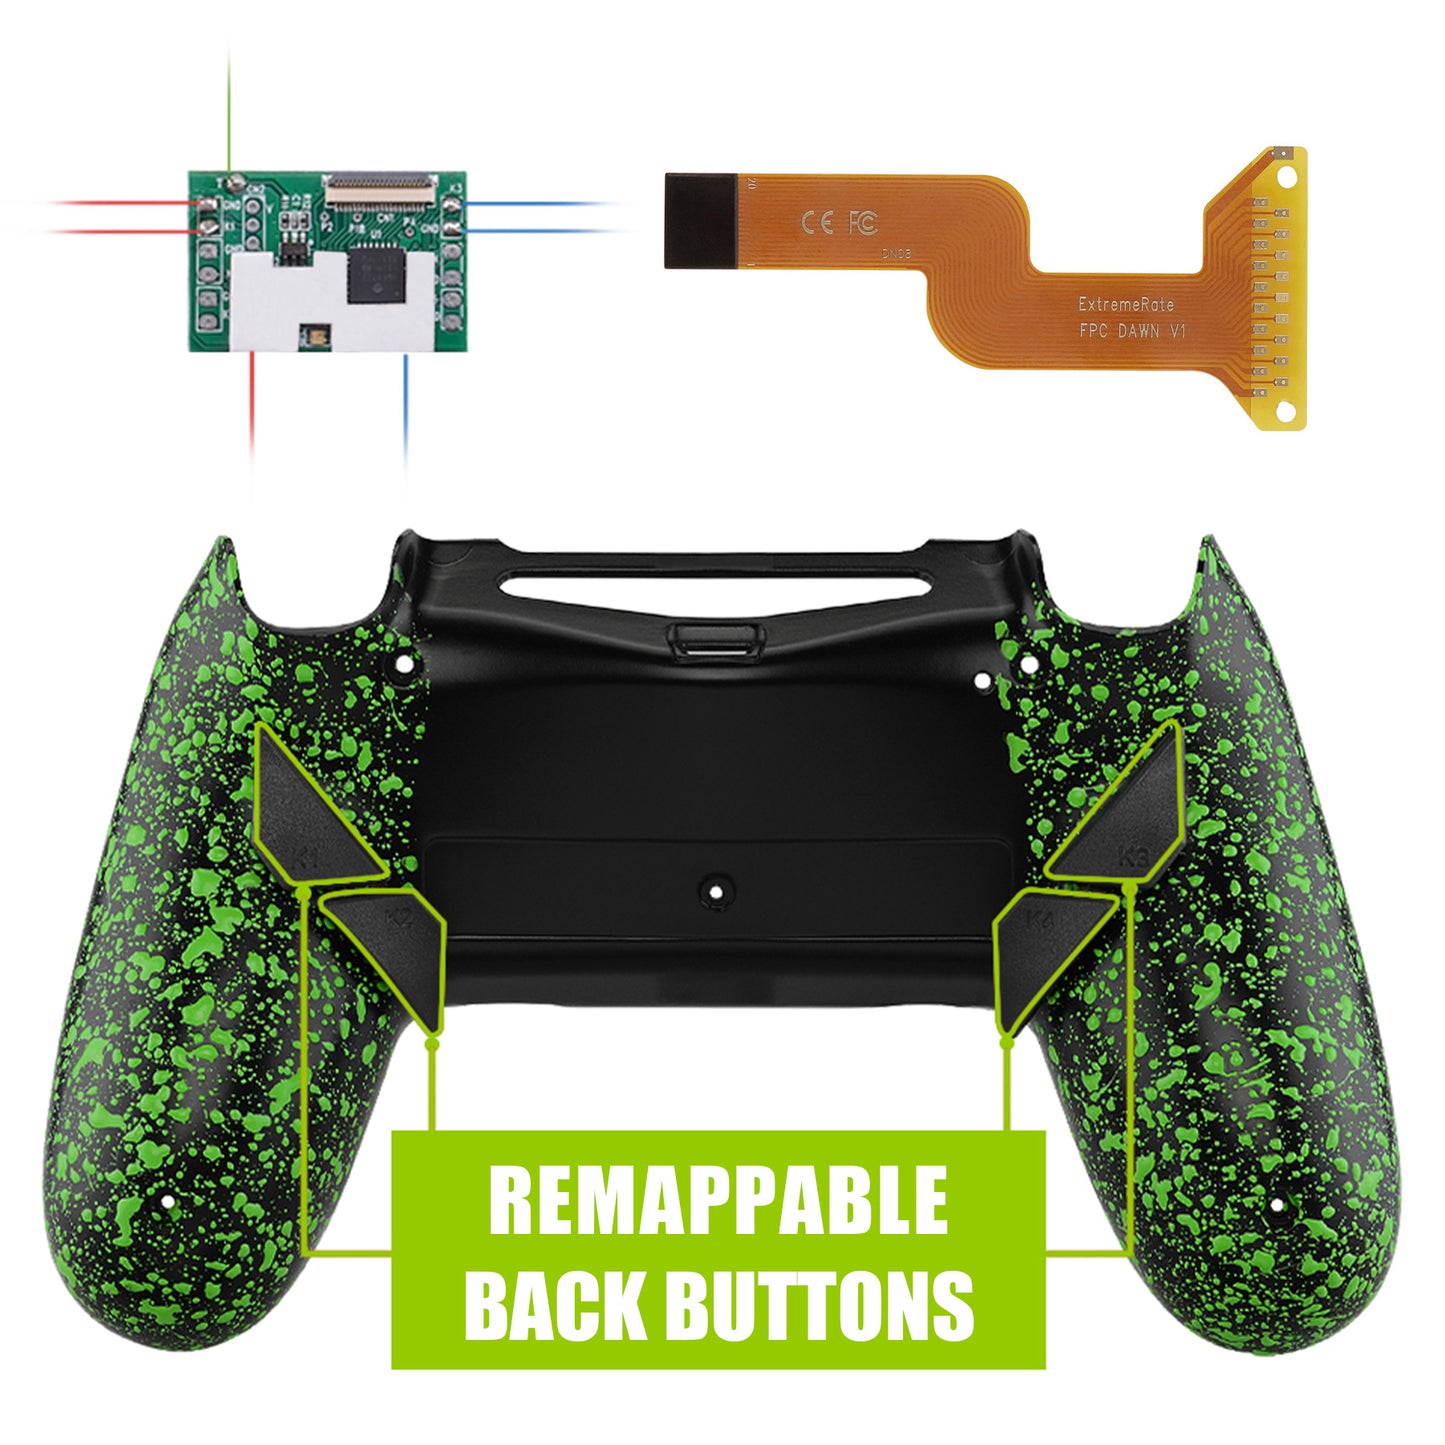 Textured Green Dawn Remappable Remap Kit with Redesigned Back Shell & 4 Back Buttons for ps4 Controller JDM 040/050/055 - P4RM010 eXtremeRate